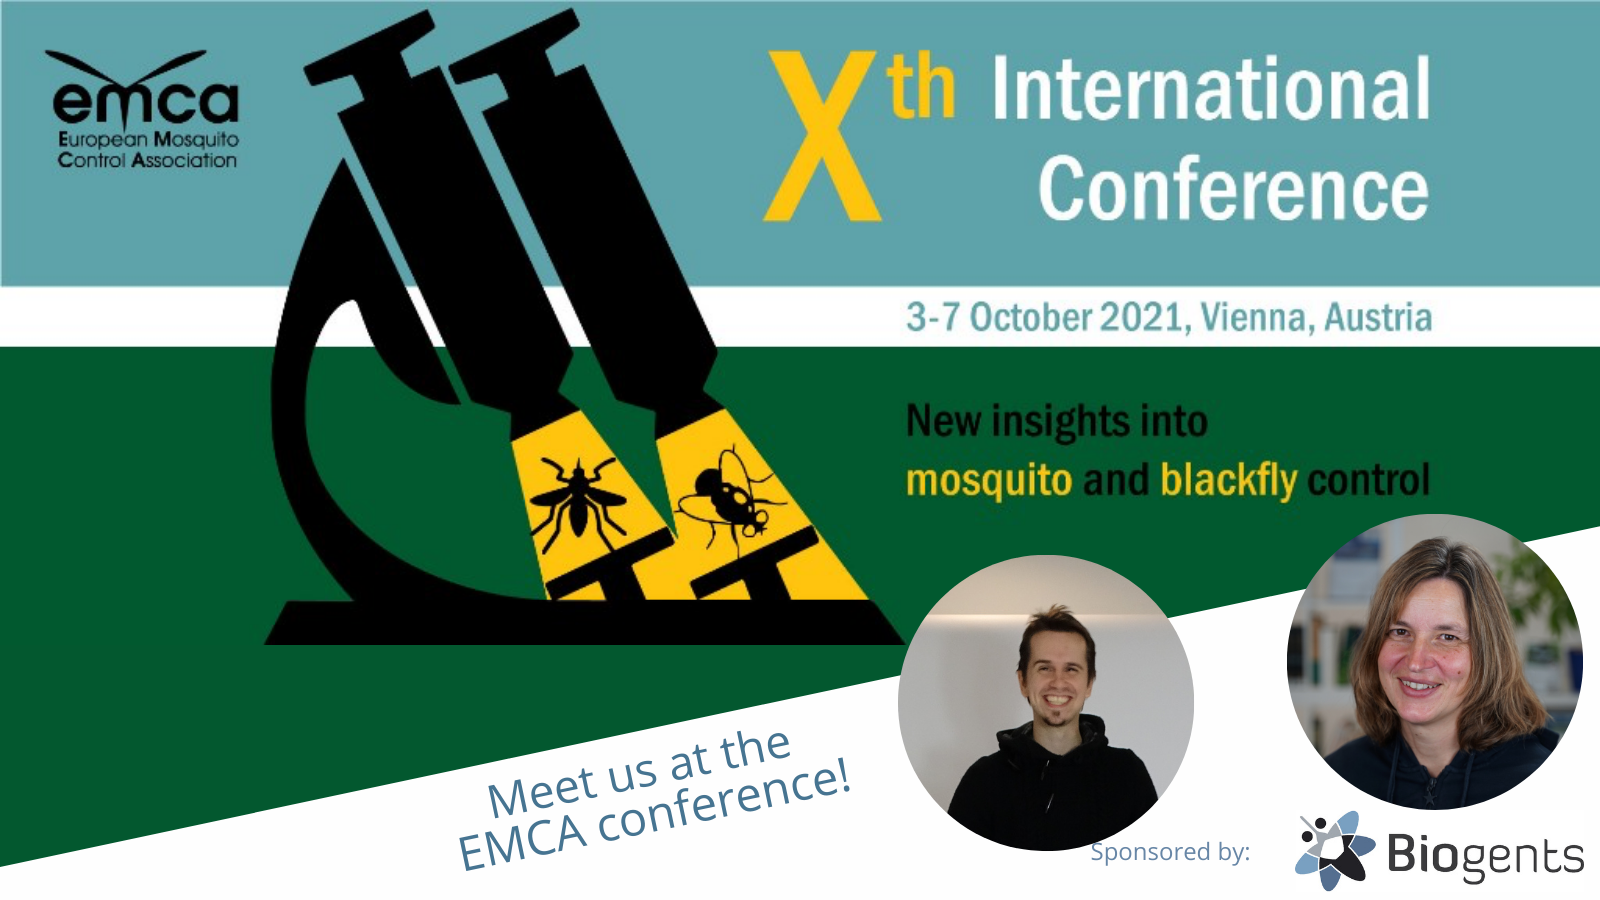 Meet us at the EMCA in Vienna!